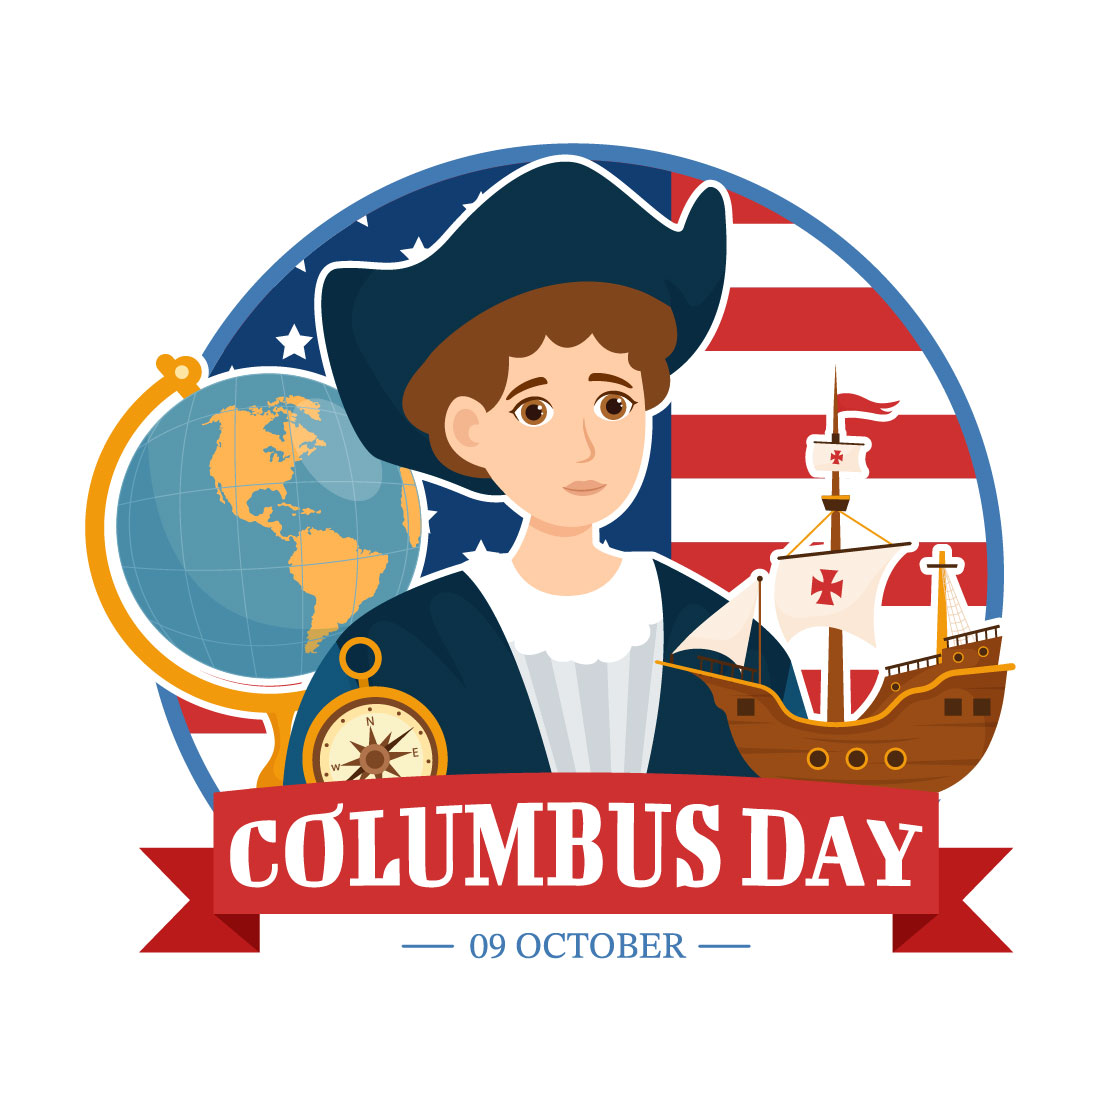 15 Happy Columbus Day Illustration cover image.